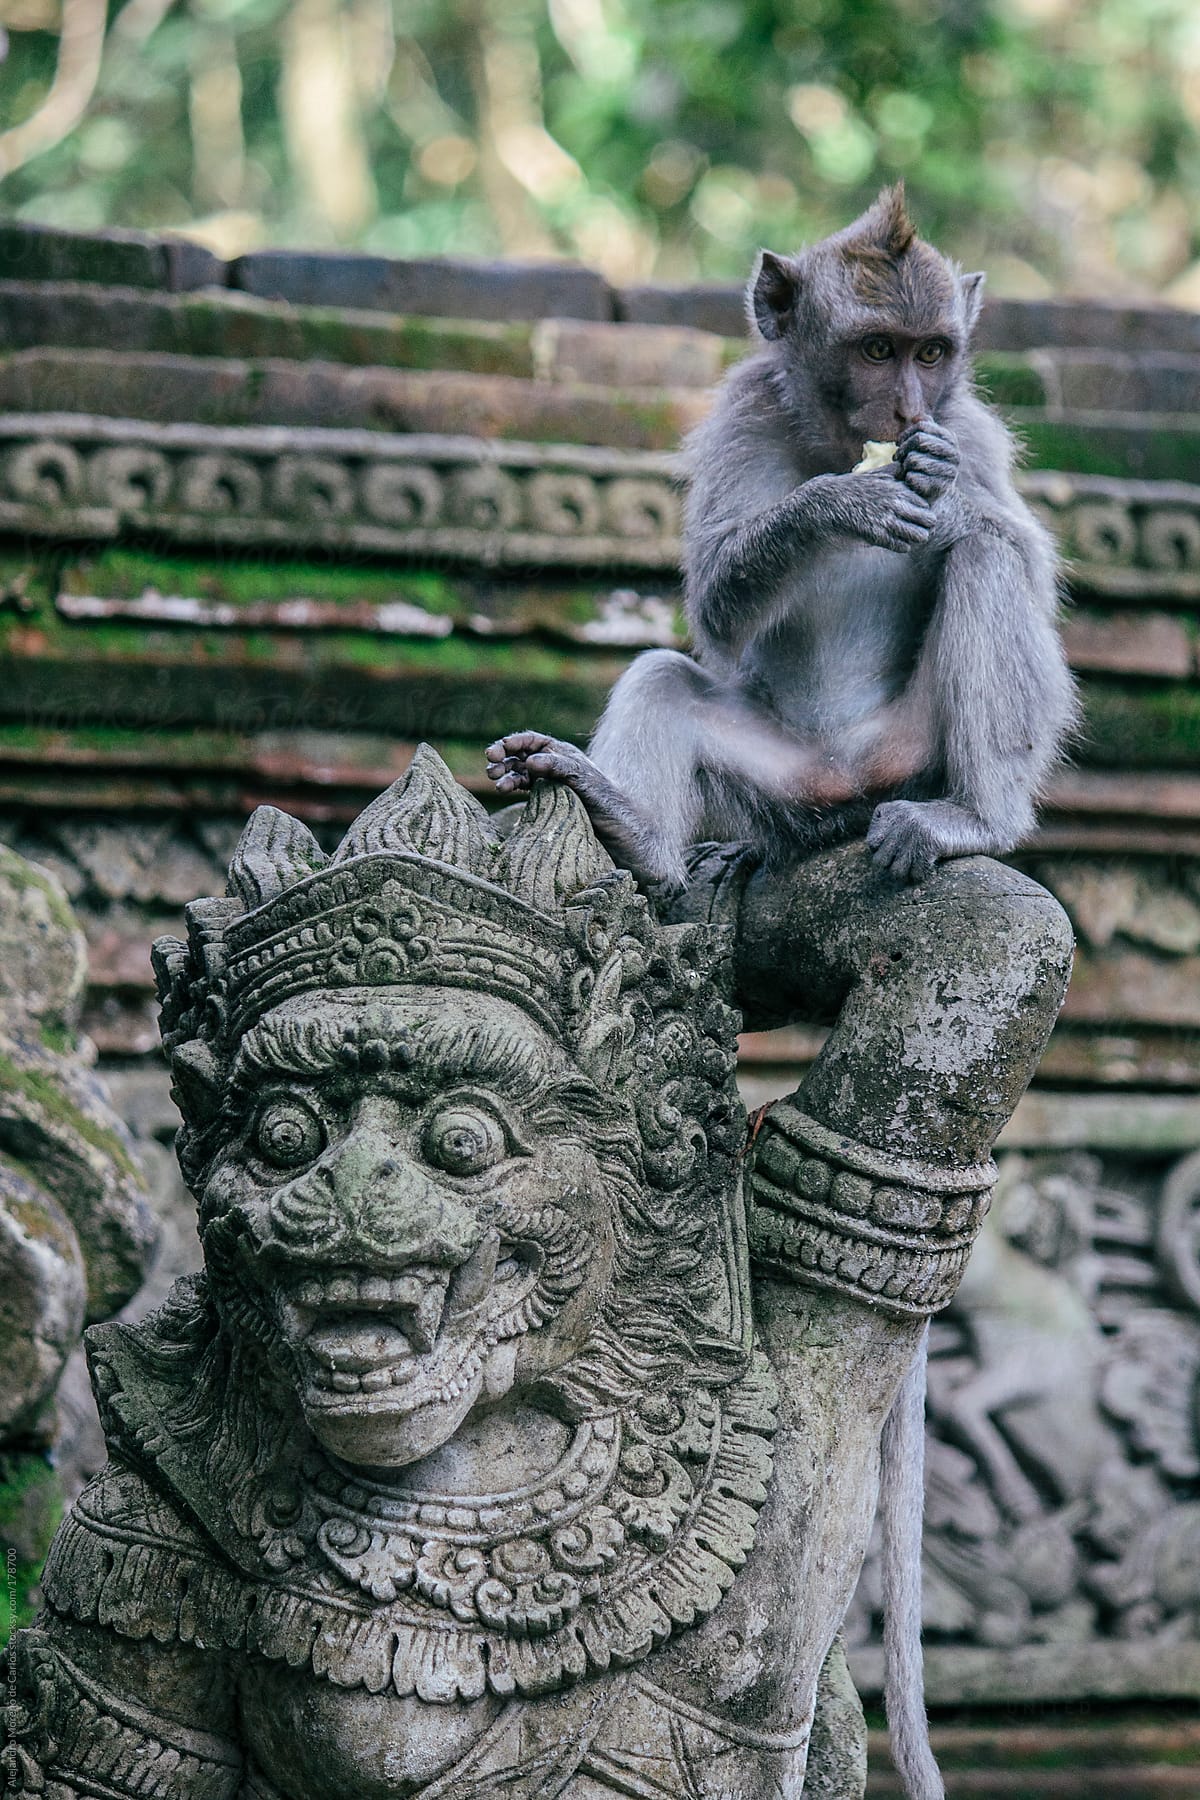 Monkey on top of asian statue, Bali, Indonesia